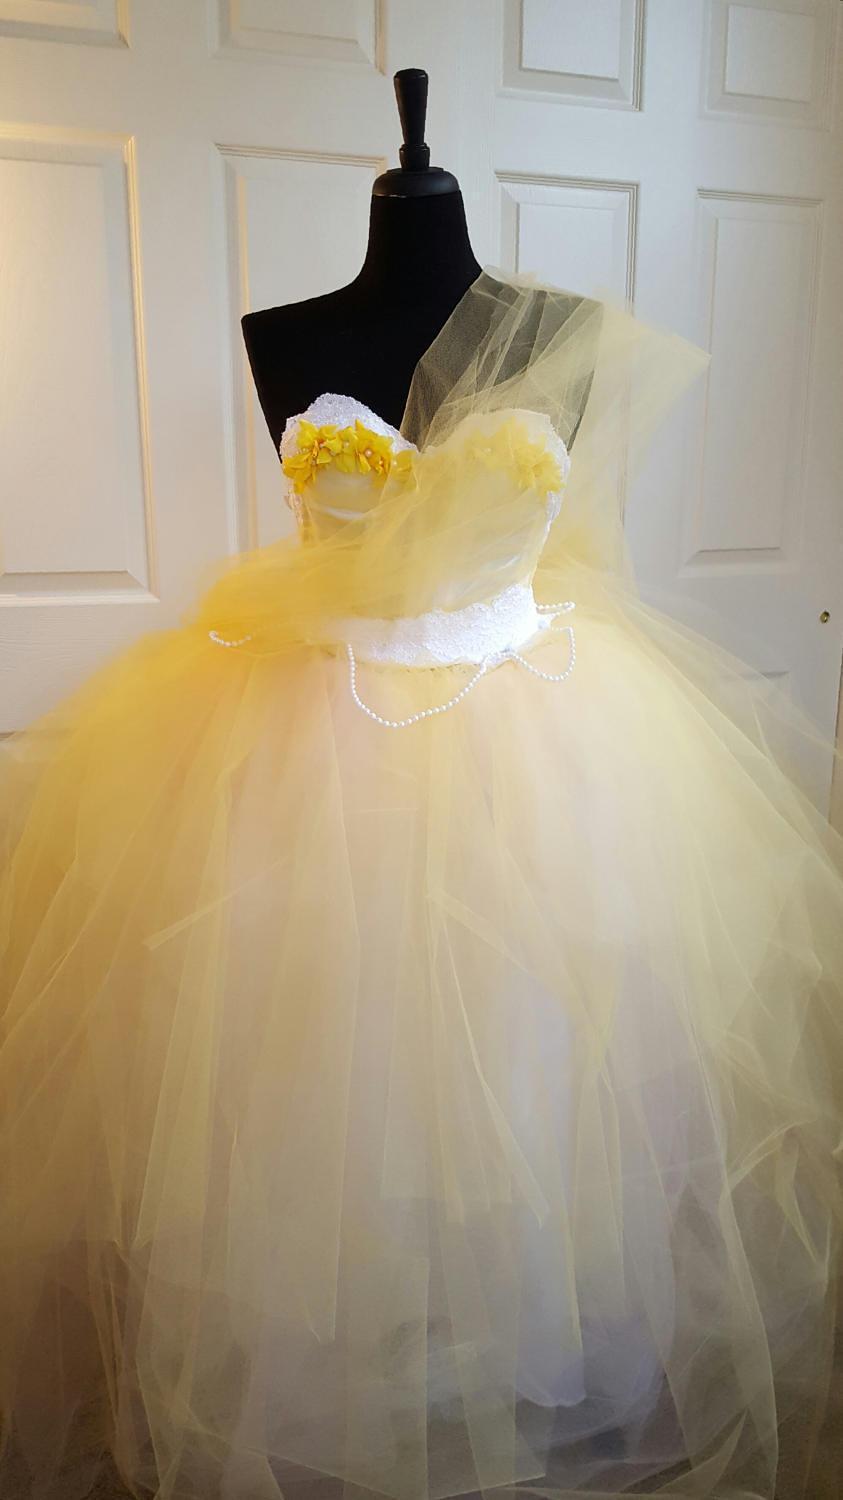 Hochzeit - Sample Gown / Yellow And White Lace Tulle Corset Lehenga Saree Sari Bridal Wedding Ball Gown Party Costume Quinceanera Prom